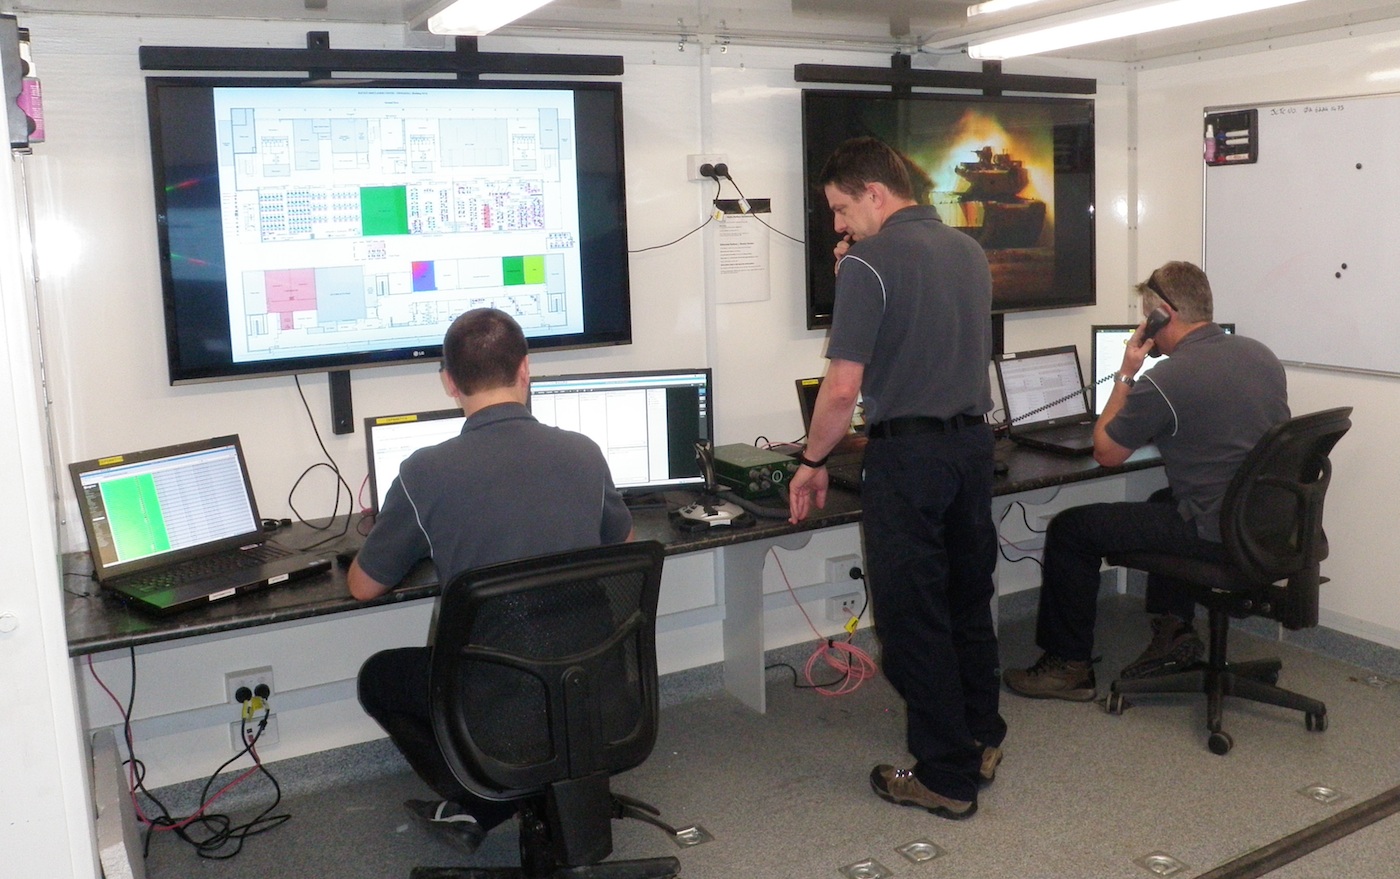 Calytrix personnel manning the ADSTC’s Deployable Exercise Control Centre (DECC) in preparation for VP14.